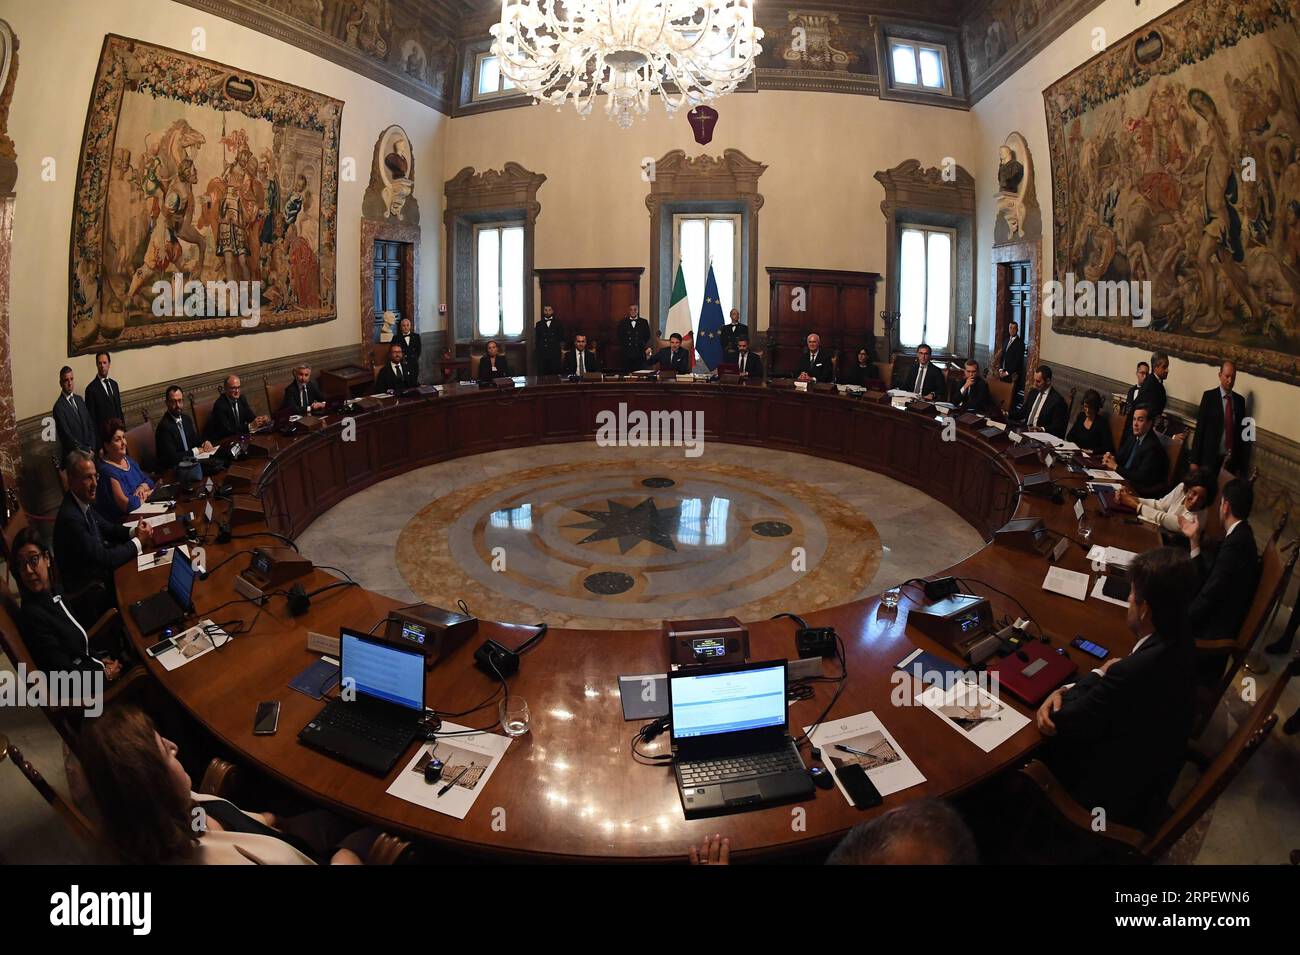 News Bilder des Tages (190905) -- ROME, Sept. 5, 2019 -- Photo taken on Sept. 5, 2019 shows the first meeting of the new cabinet at Chigi Palace in Rome, Italy. The new slate of ministers for Giuseppe Conte s second stint as Italy s prime minister was formally sworn in on Thursday by Italian President Sergio Mattarella, bringing the unlikely coalition between Italian populists and an old-guard center-left party a step away from power. (Photo by Alberto Lingria/Xinhua) ITALY-ROME-NEW MINISTERS-SWORN IN AxErbeituo¤lingeliya PUBLICATIONxNOTxINxCHN Stock Photo